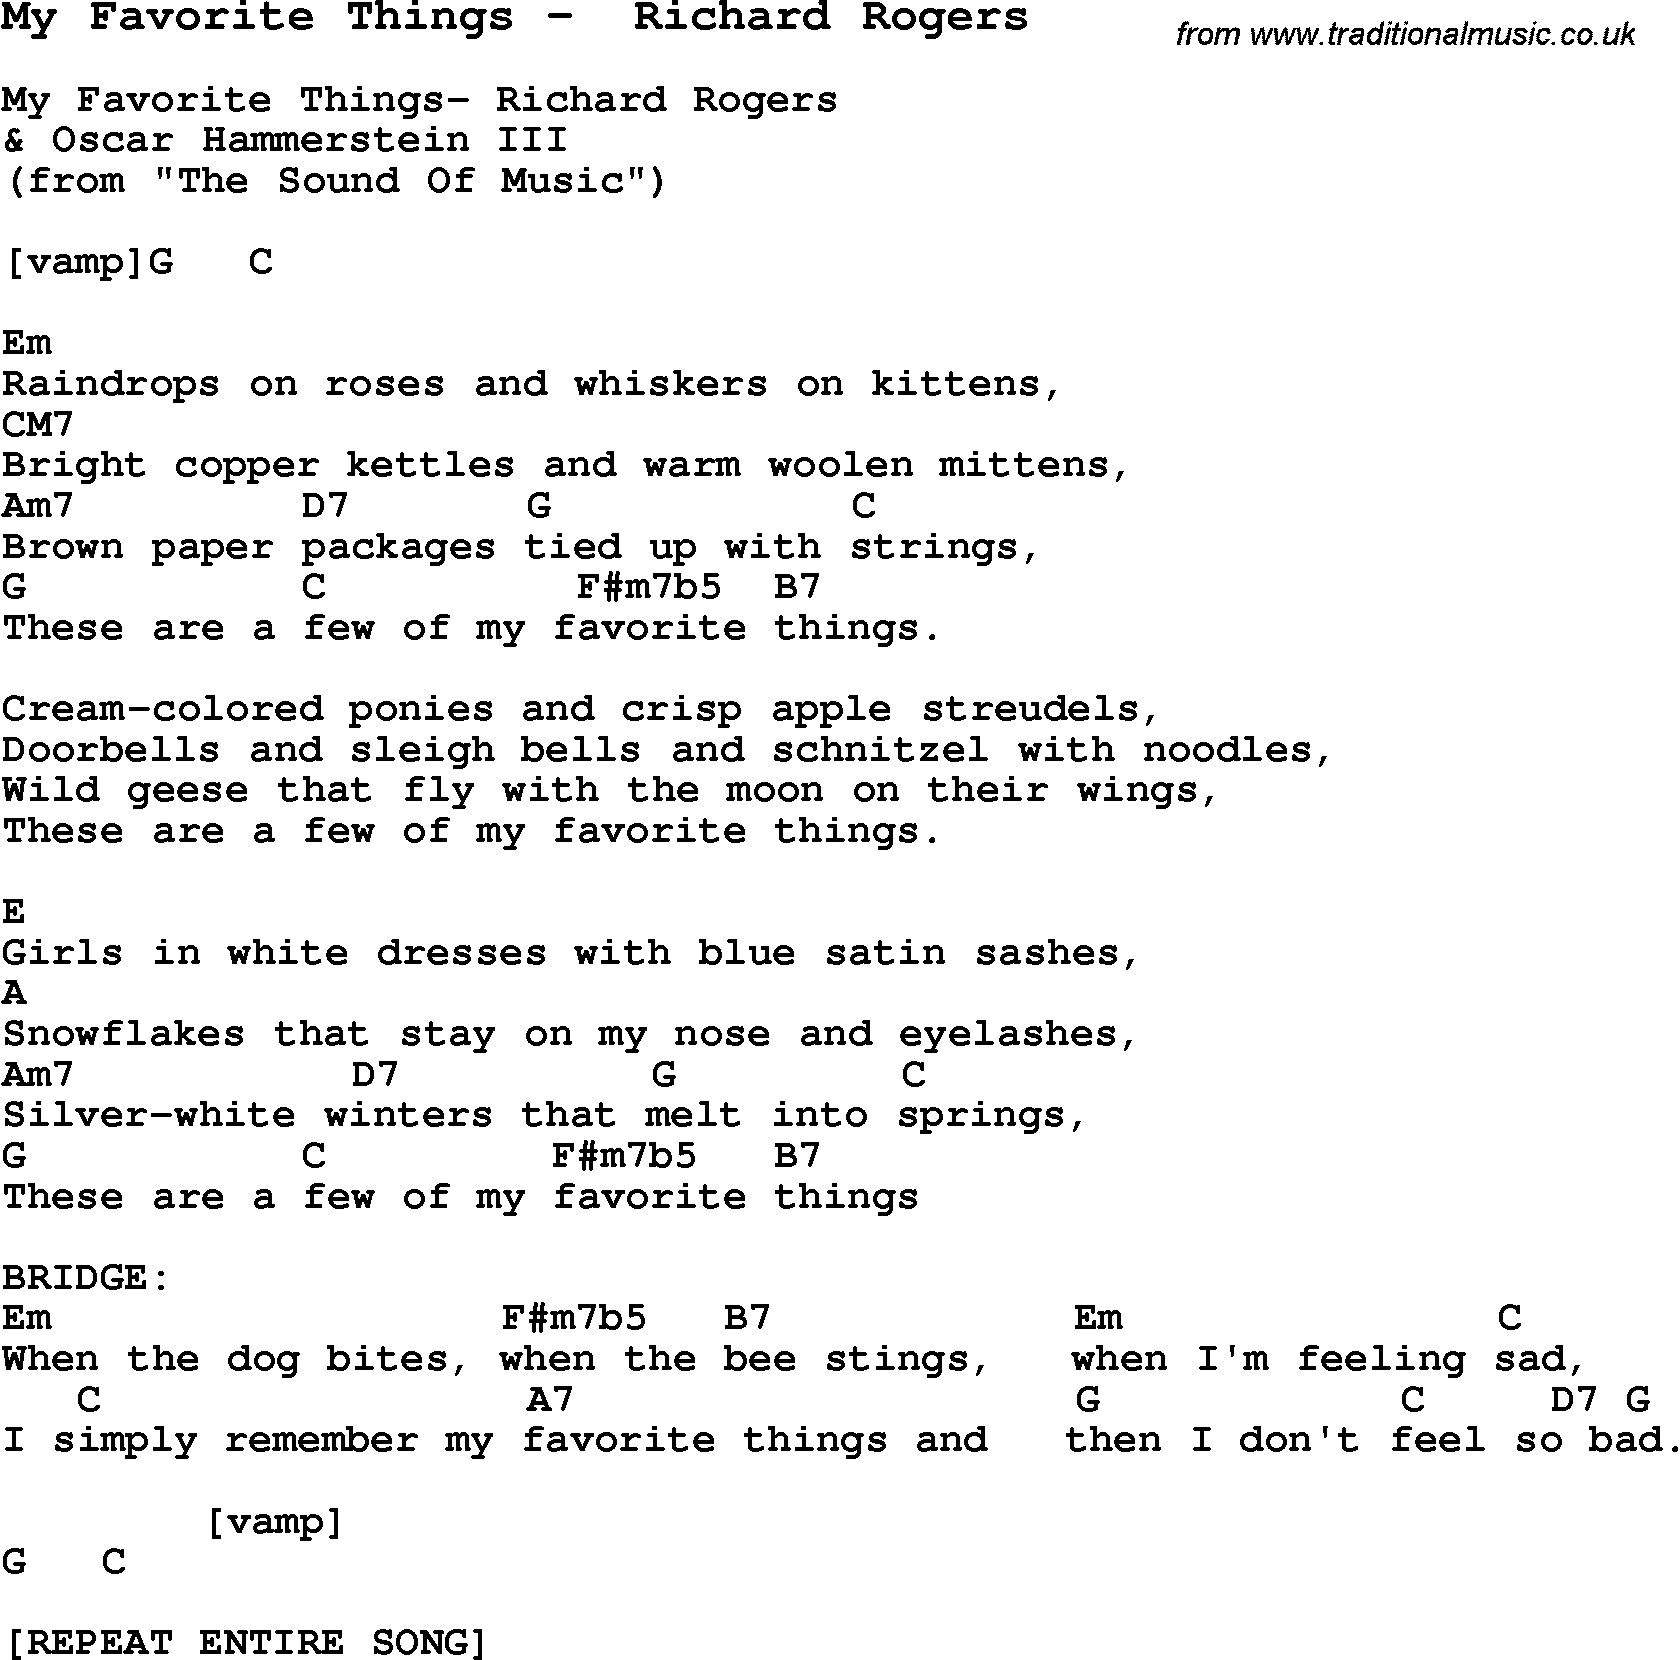 Song My Favorite Things by  Richard Rogers, with lyrics for vocal performance and accompaniment chords for Ukulele, Guitar Banjo etc.